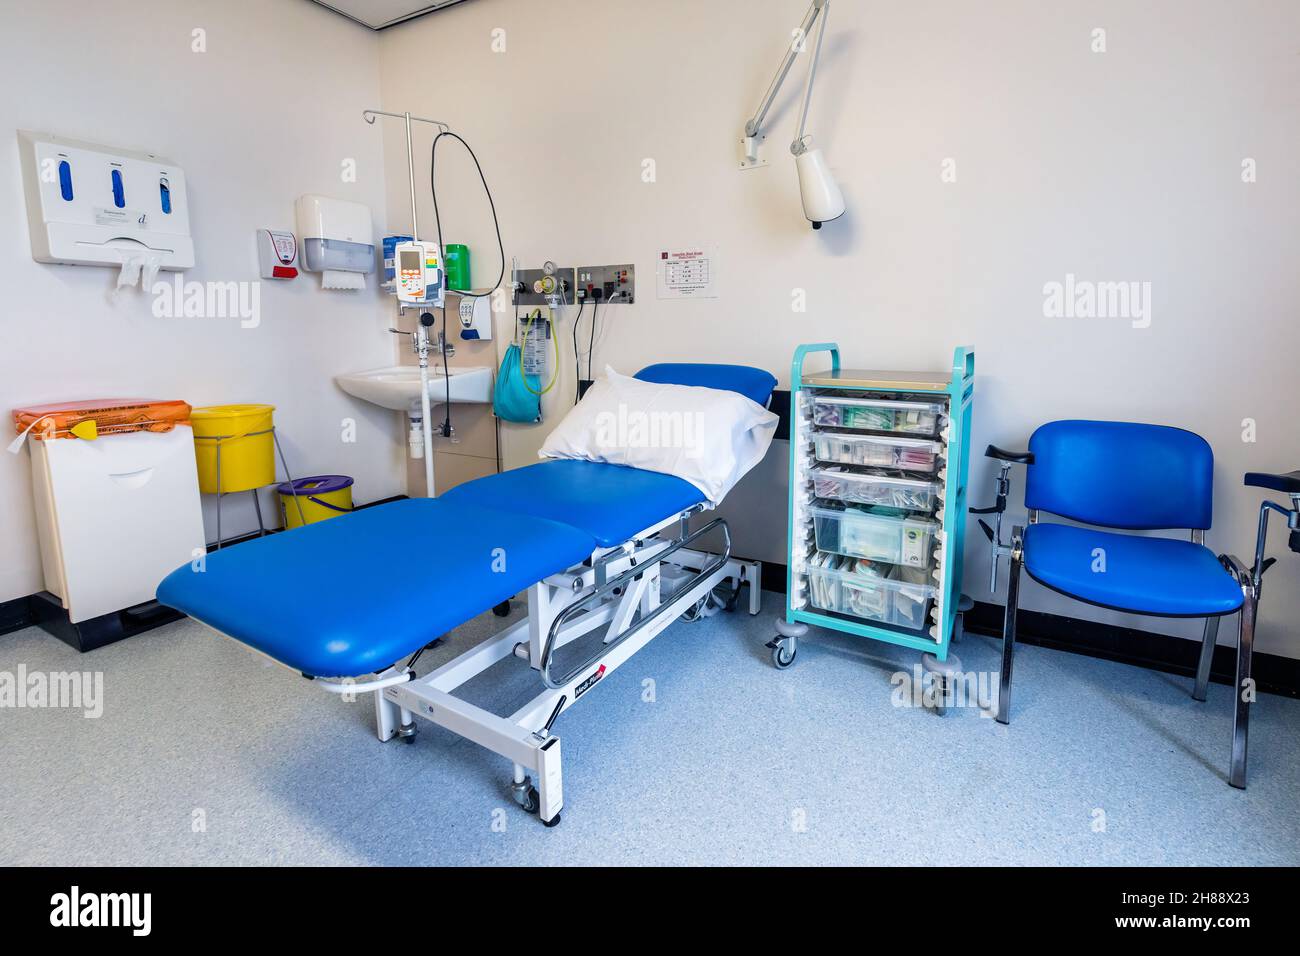 Hospital Treatment Room at Leicester Royal Infirmary. Used for Chemotherapy treatment, blood transfusions and medical examinations Stock Photo